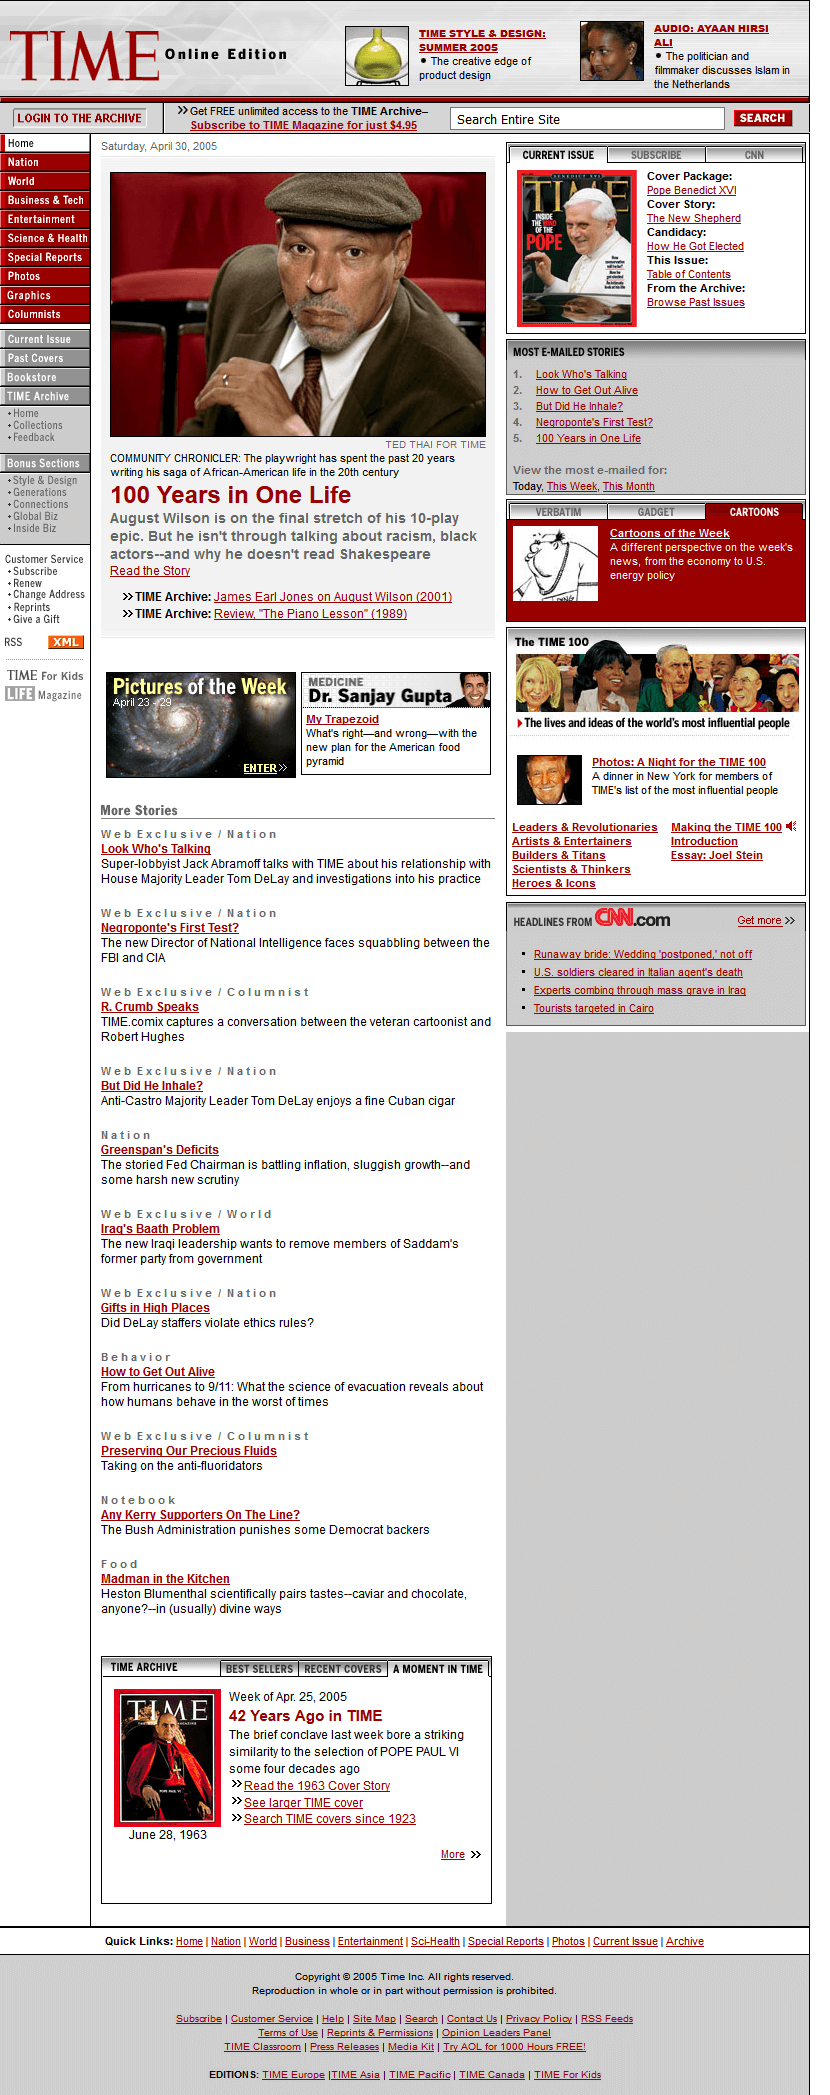 Time website in 2005